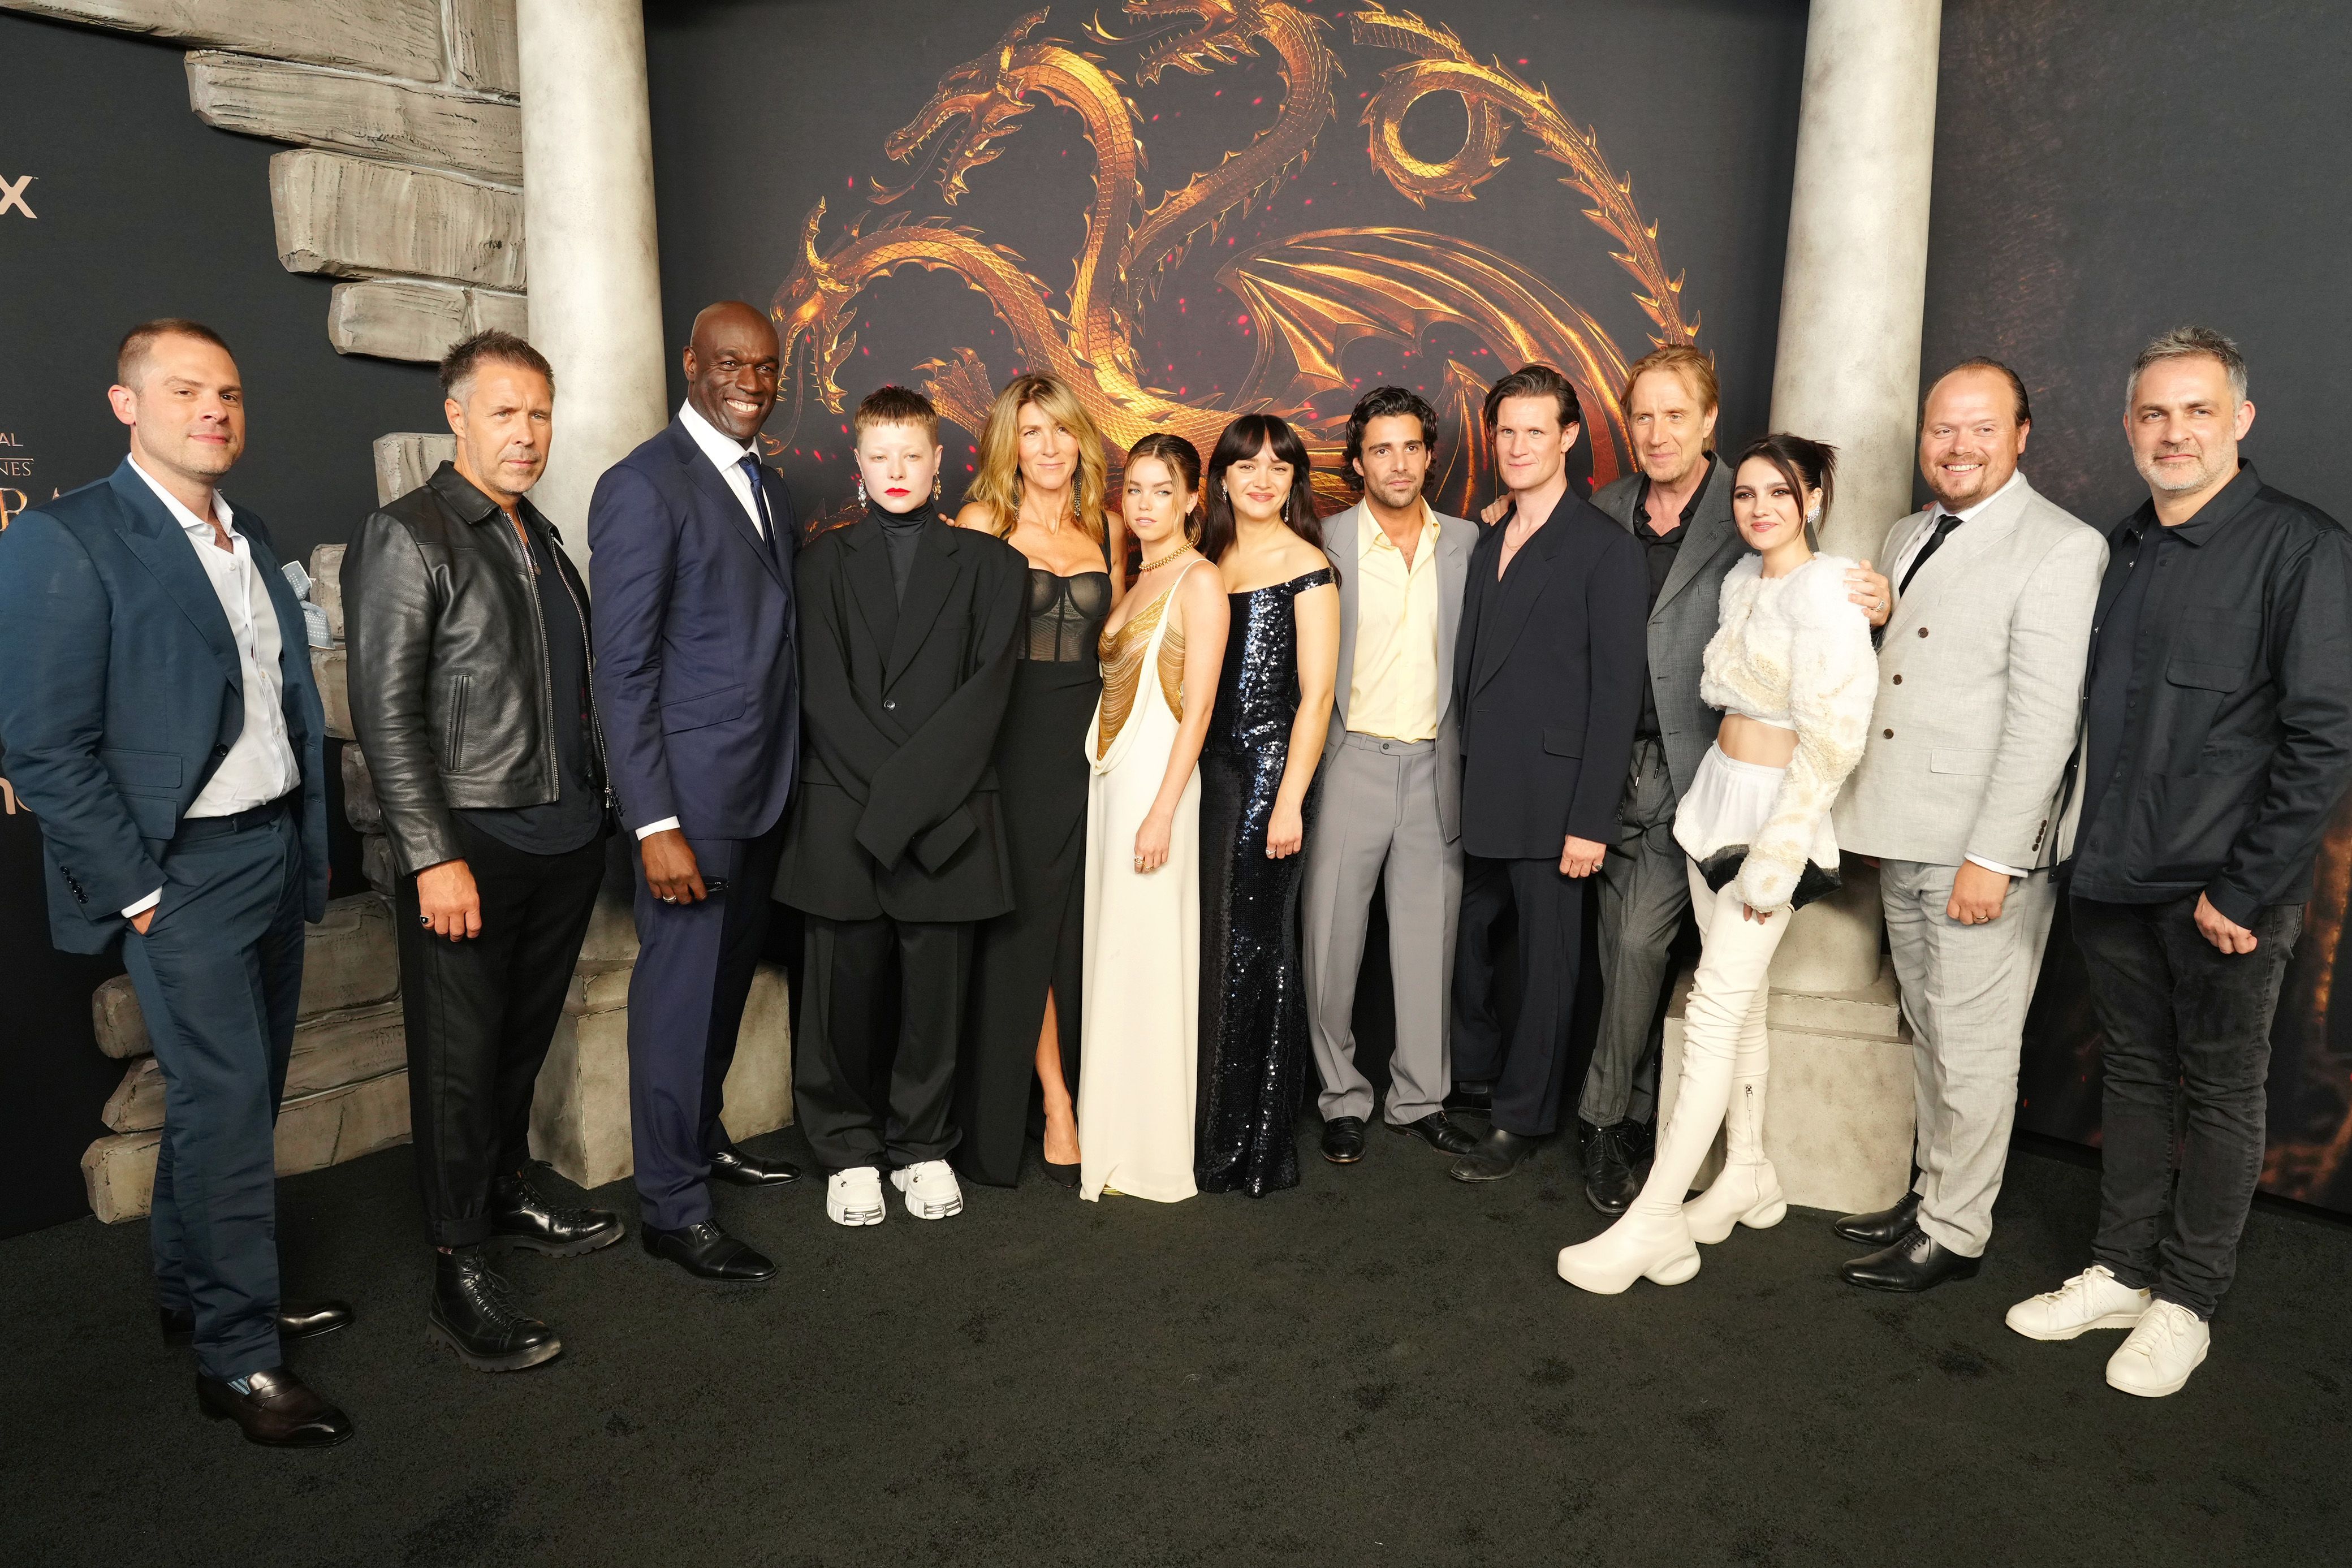 How to Get Cast on 'House of the Dragon